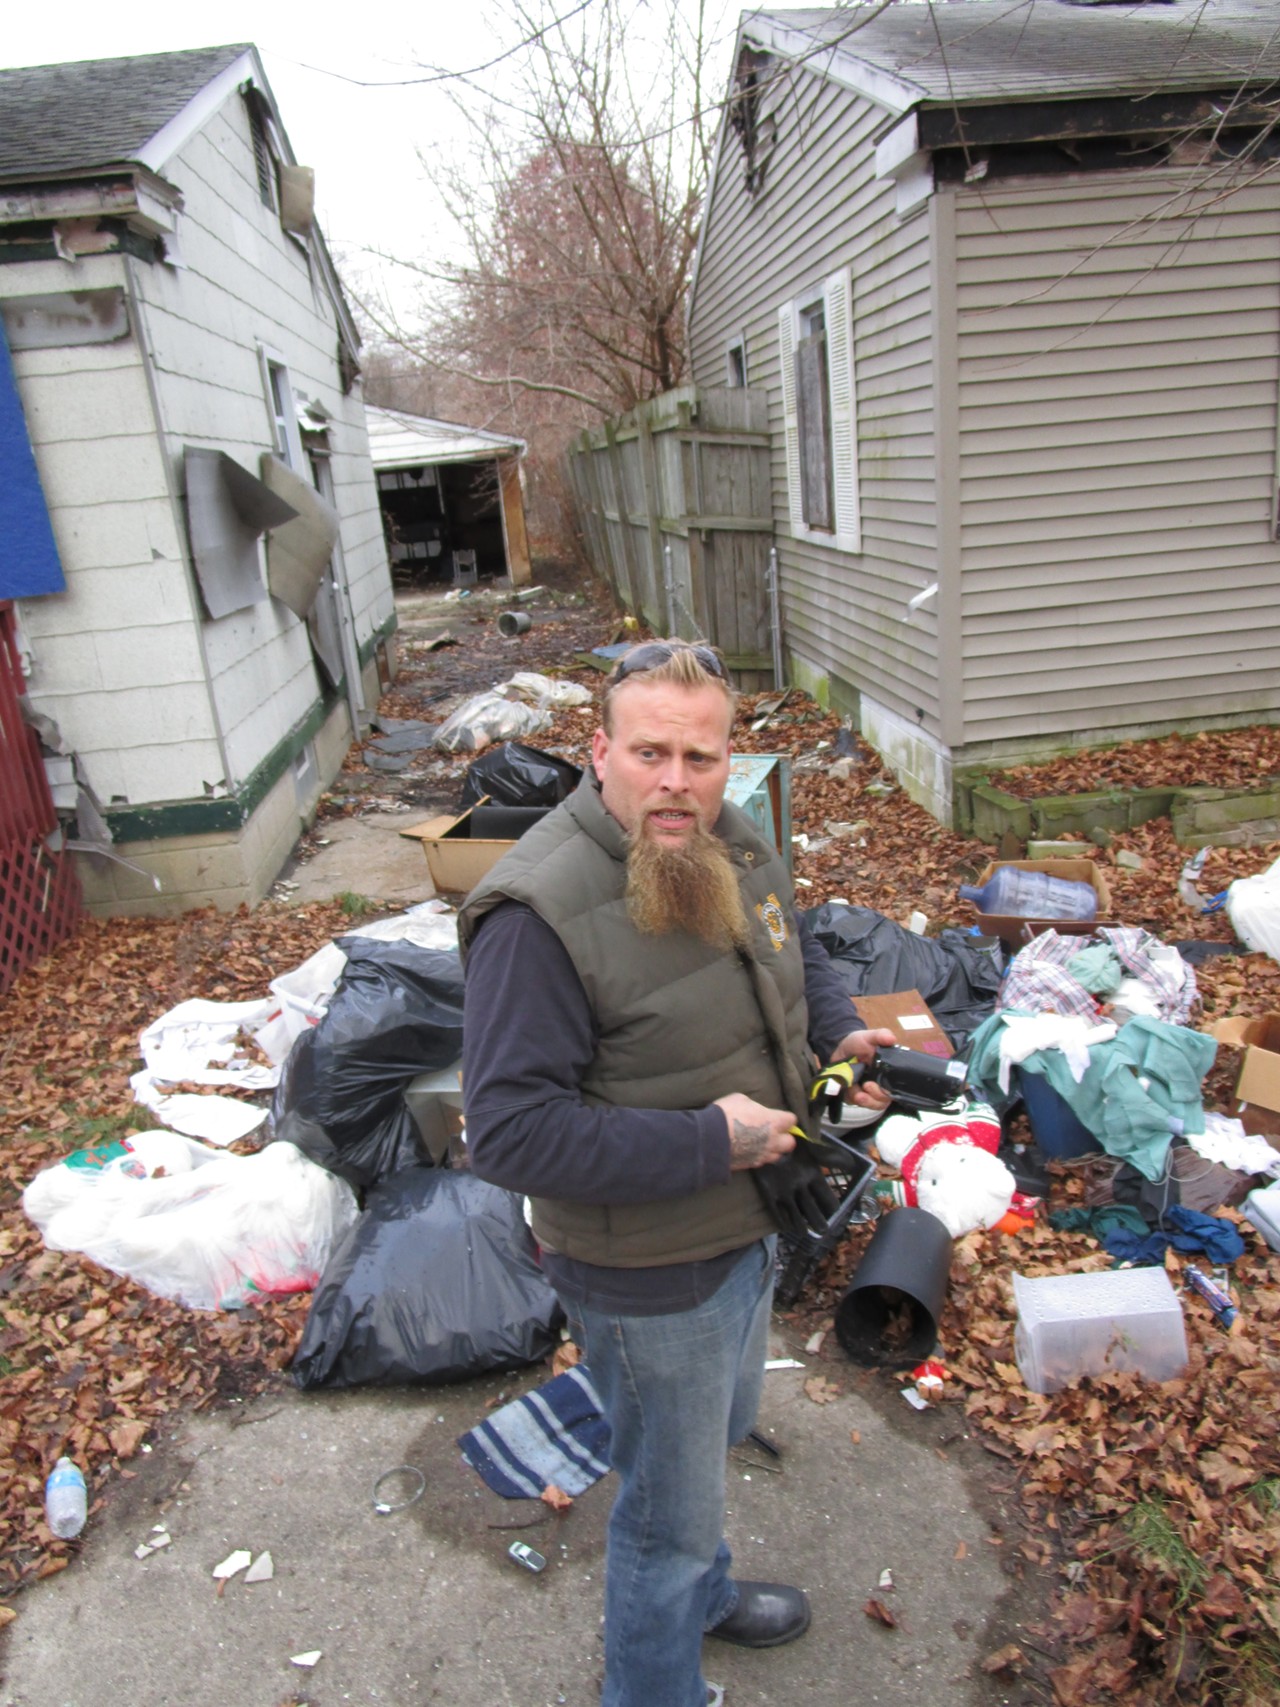 He's looking for mail pieces, bills, order forms, anything with an address. Often, people dumping are in too big a hurry to cover their tracks.